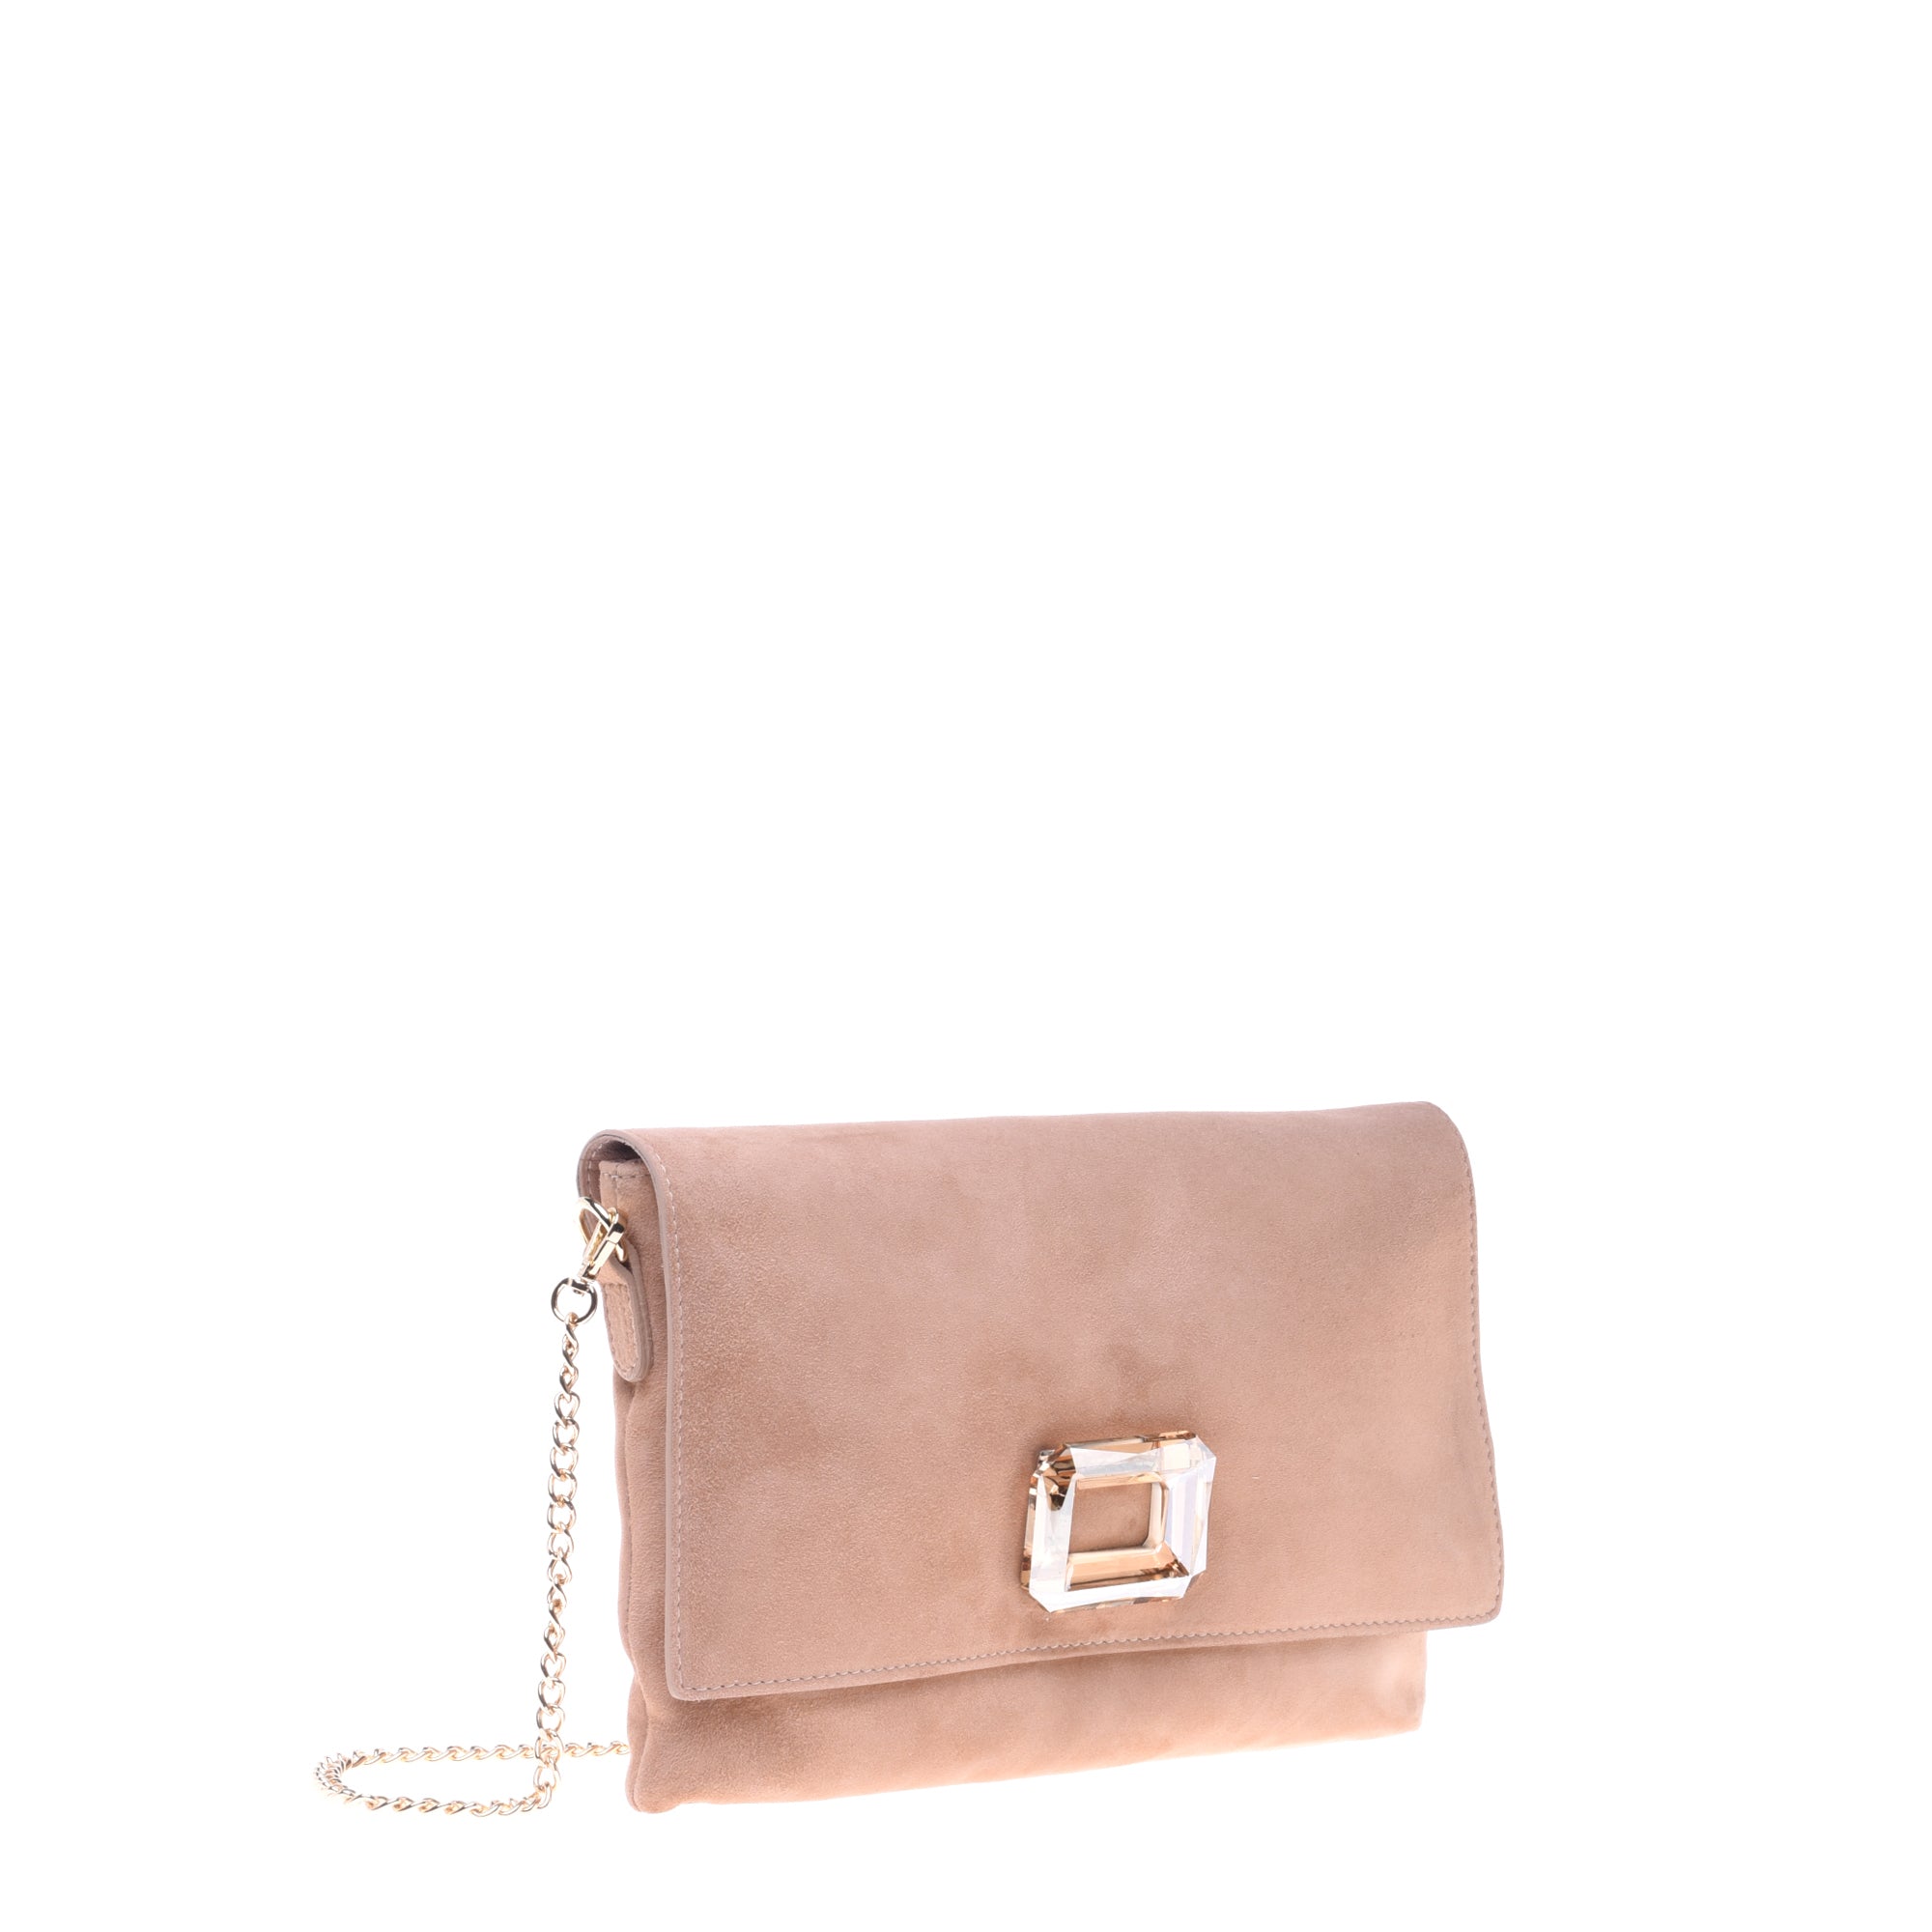 Clutch bag in taupe suede